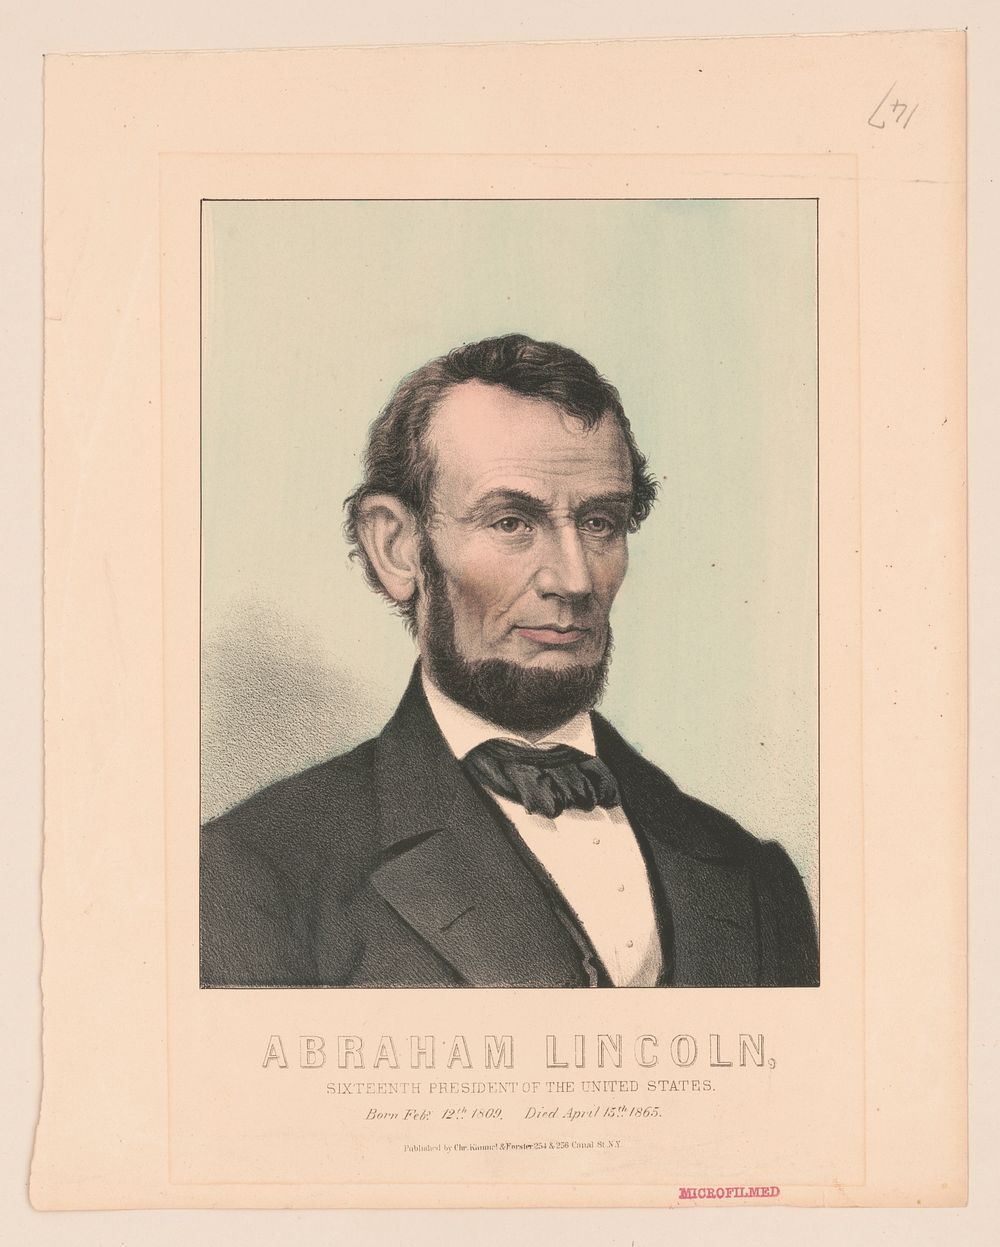 Abraham Lincoln, sixteenth president of the United States - born Feby. 12th 1809, died April 15th 1865, [New York] :…